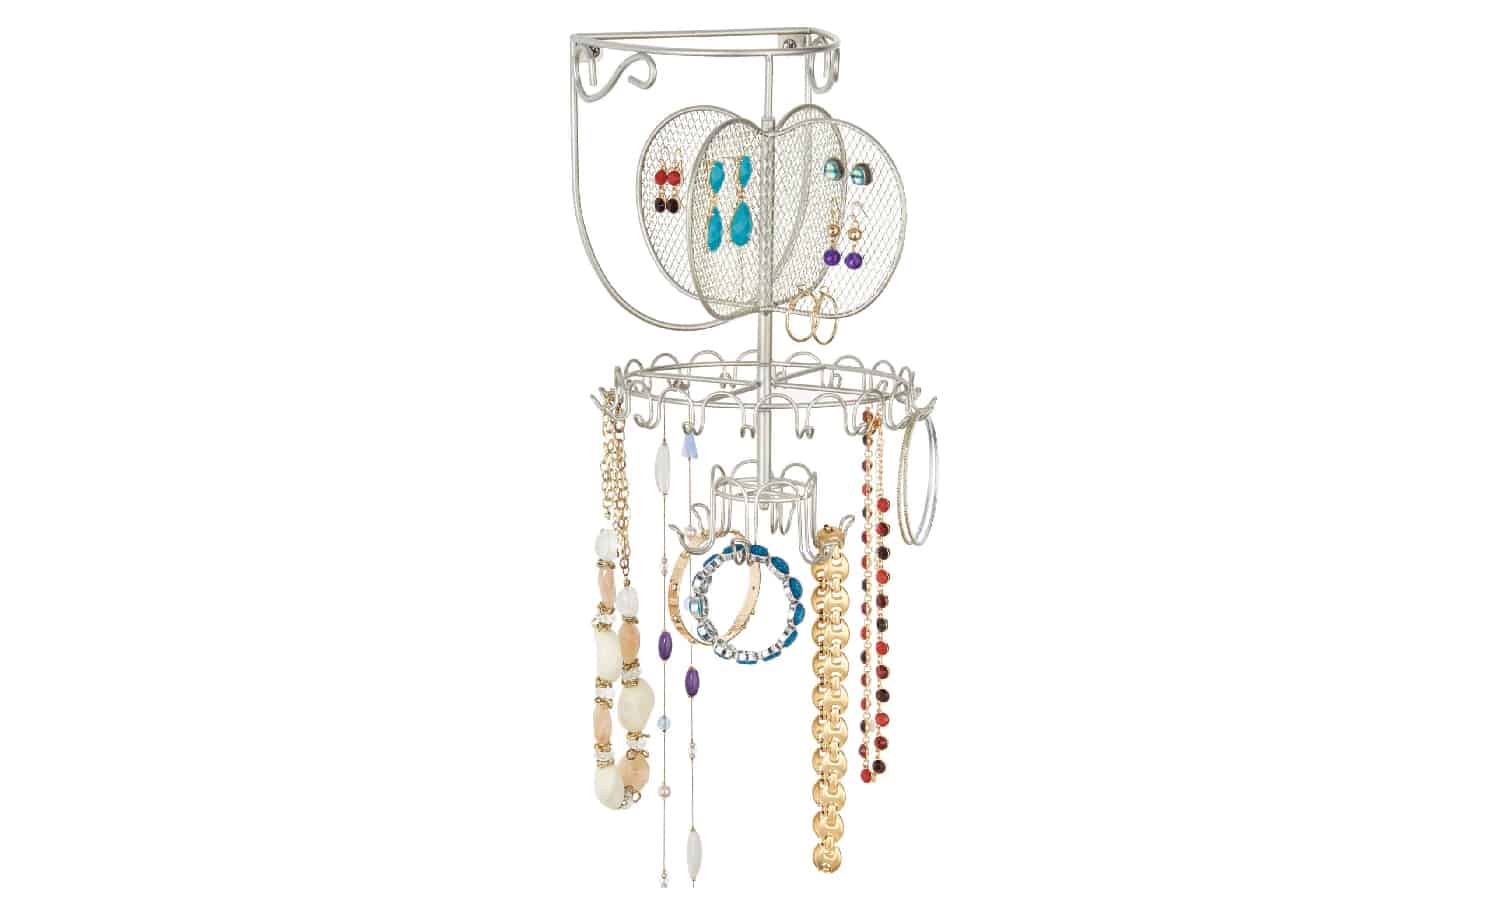 Hanging Jewelry Stand